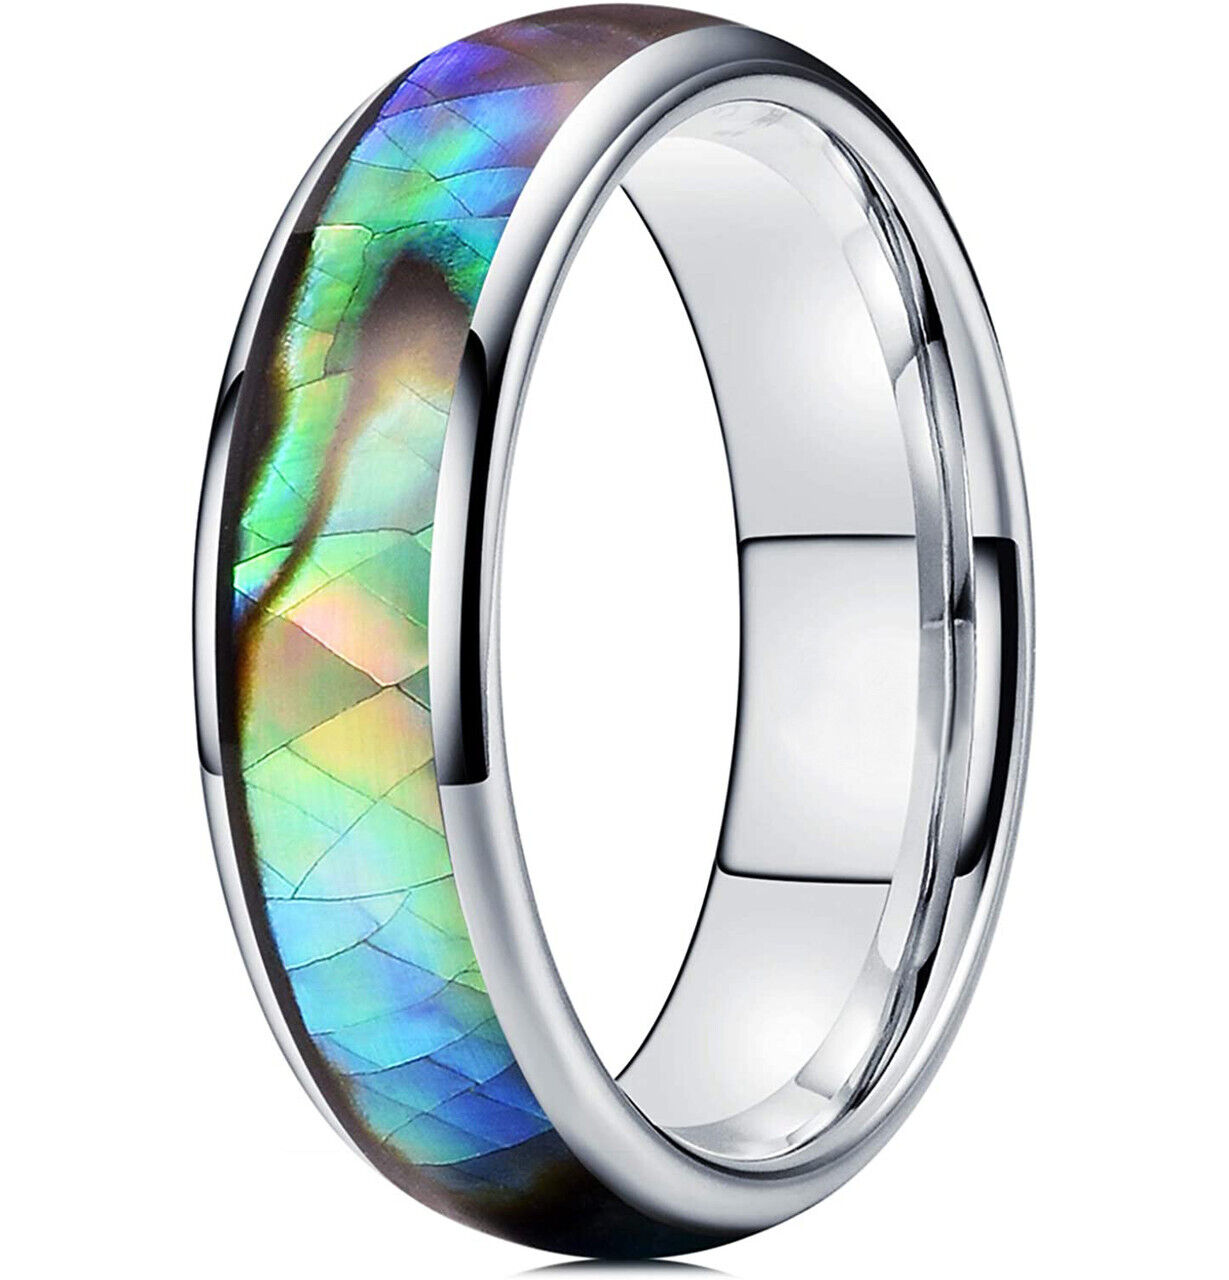 Jewelry for Men Men'S Rings Abalone Rings Daily Rings Large Decorative ...